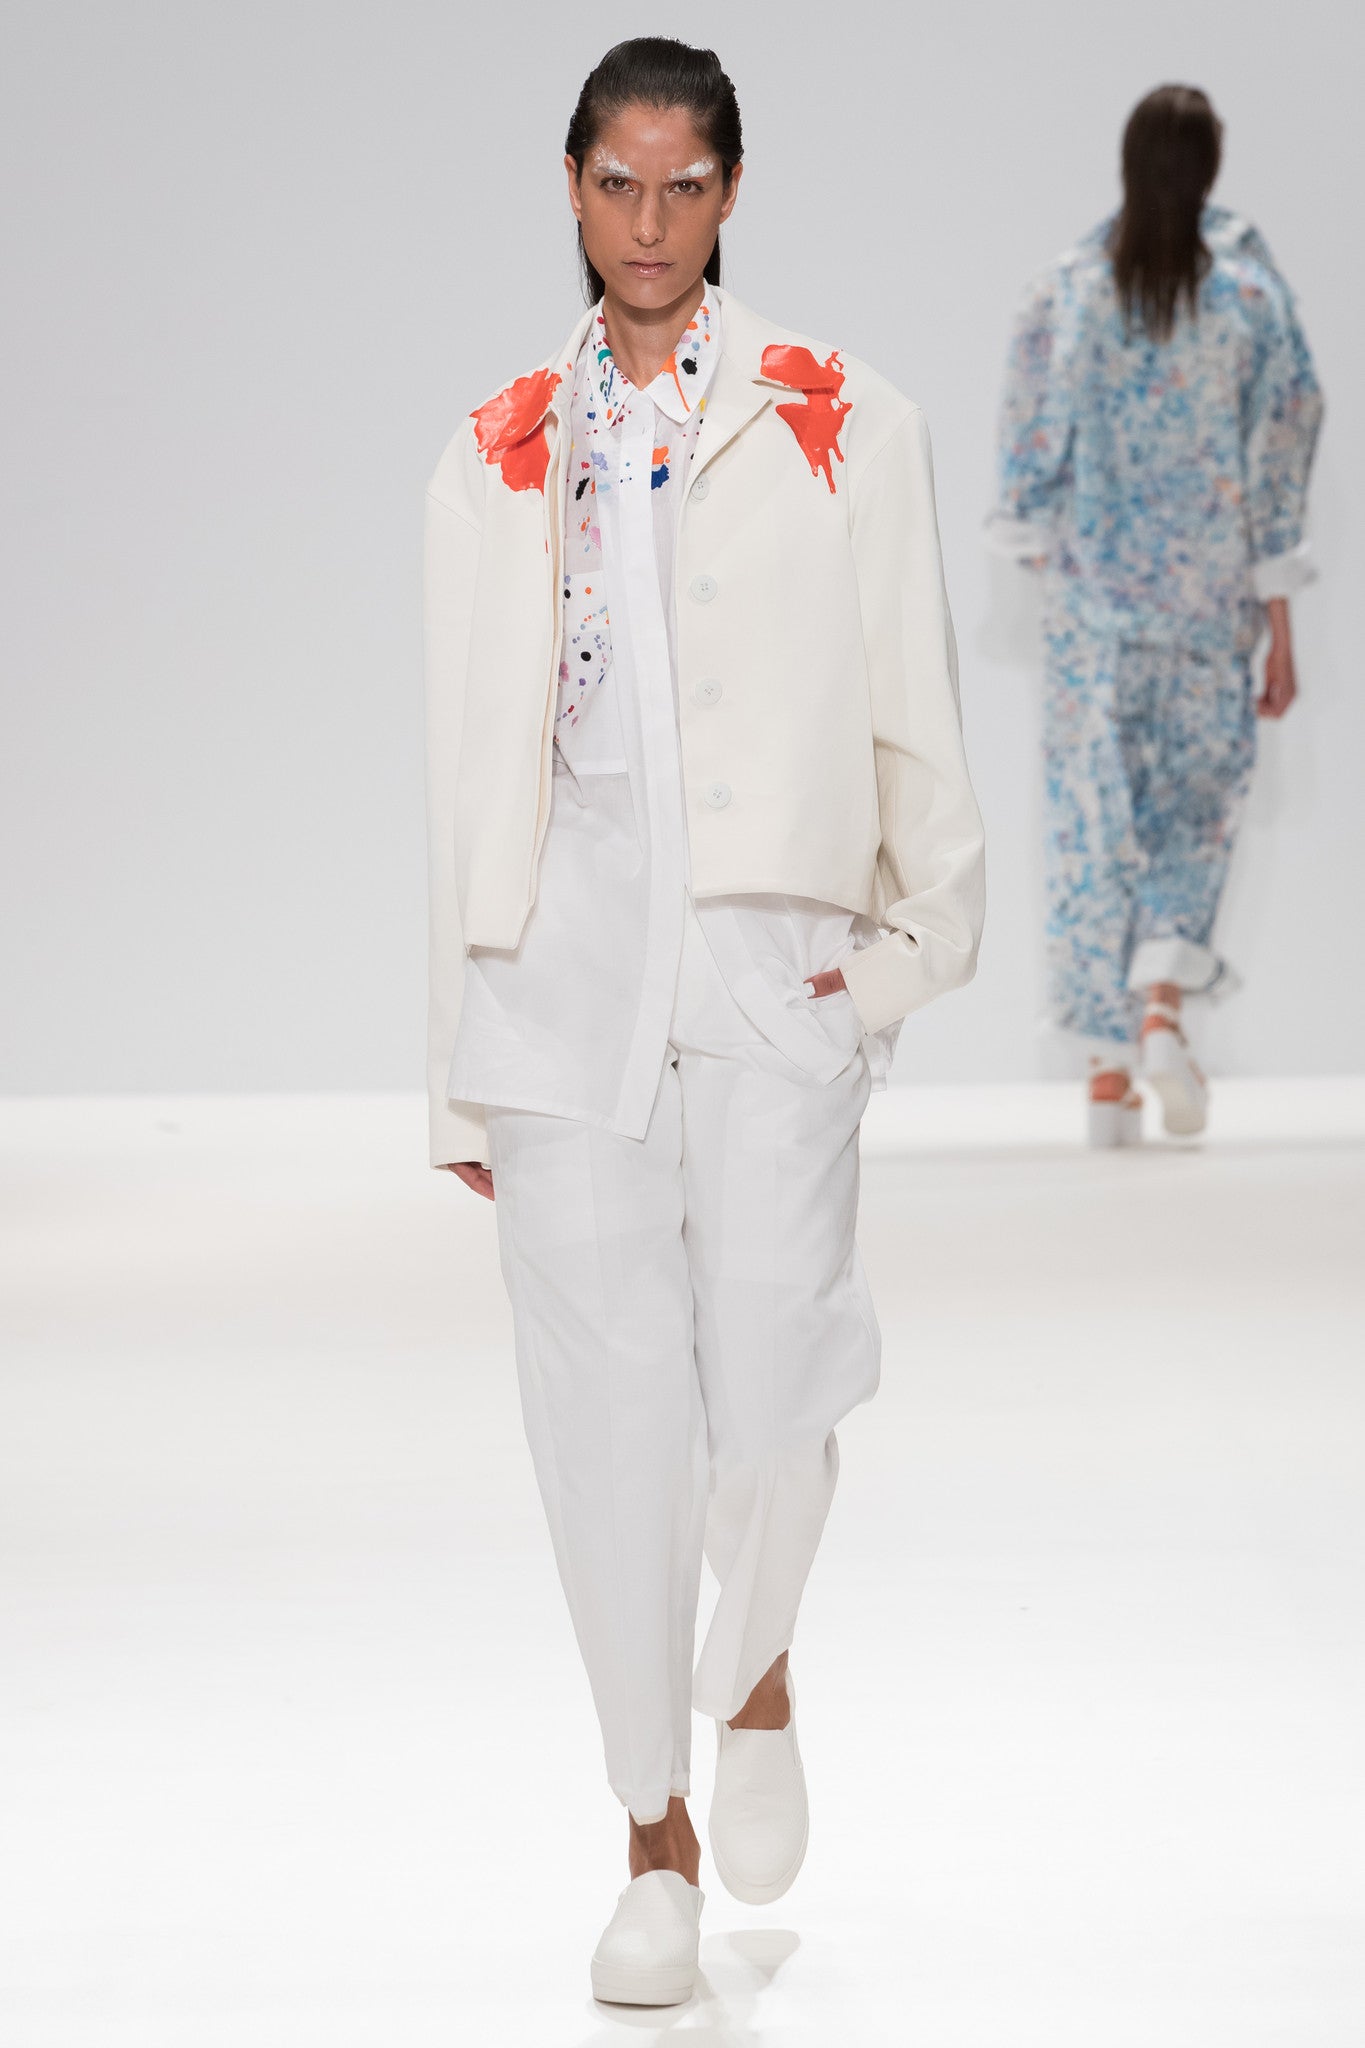 SS17 catwalk image from CIMONE'S show, showing colourful embroidered paint splashes on crisp white cotton 'cleave' shirt from emerging brand CIMONE. Embellishments and overall look at echoed by Oscar de la Renta one year later in SS18 - be ahead of the trends and support new brands! Worn with an orange rubberised paint drip collar version of out white cropped bomber - "flight jacket"